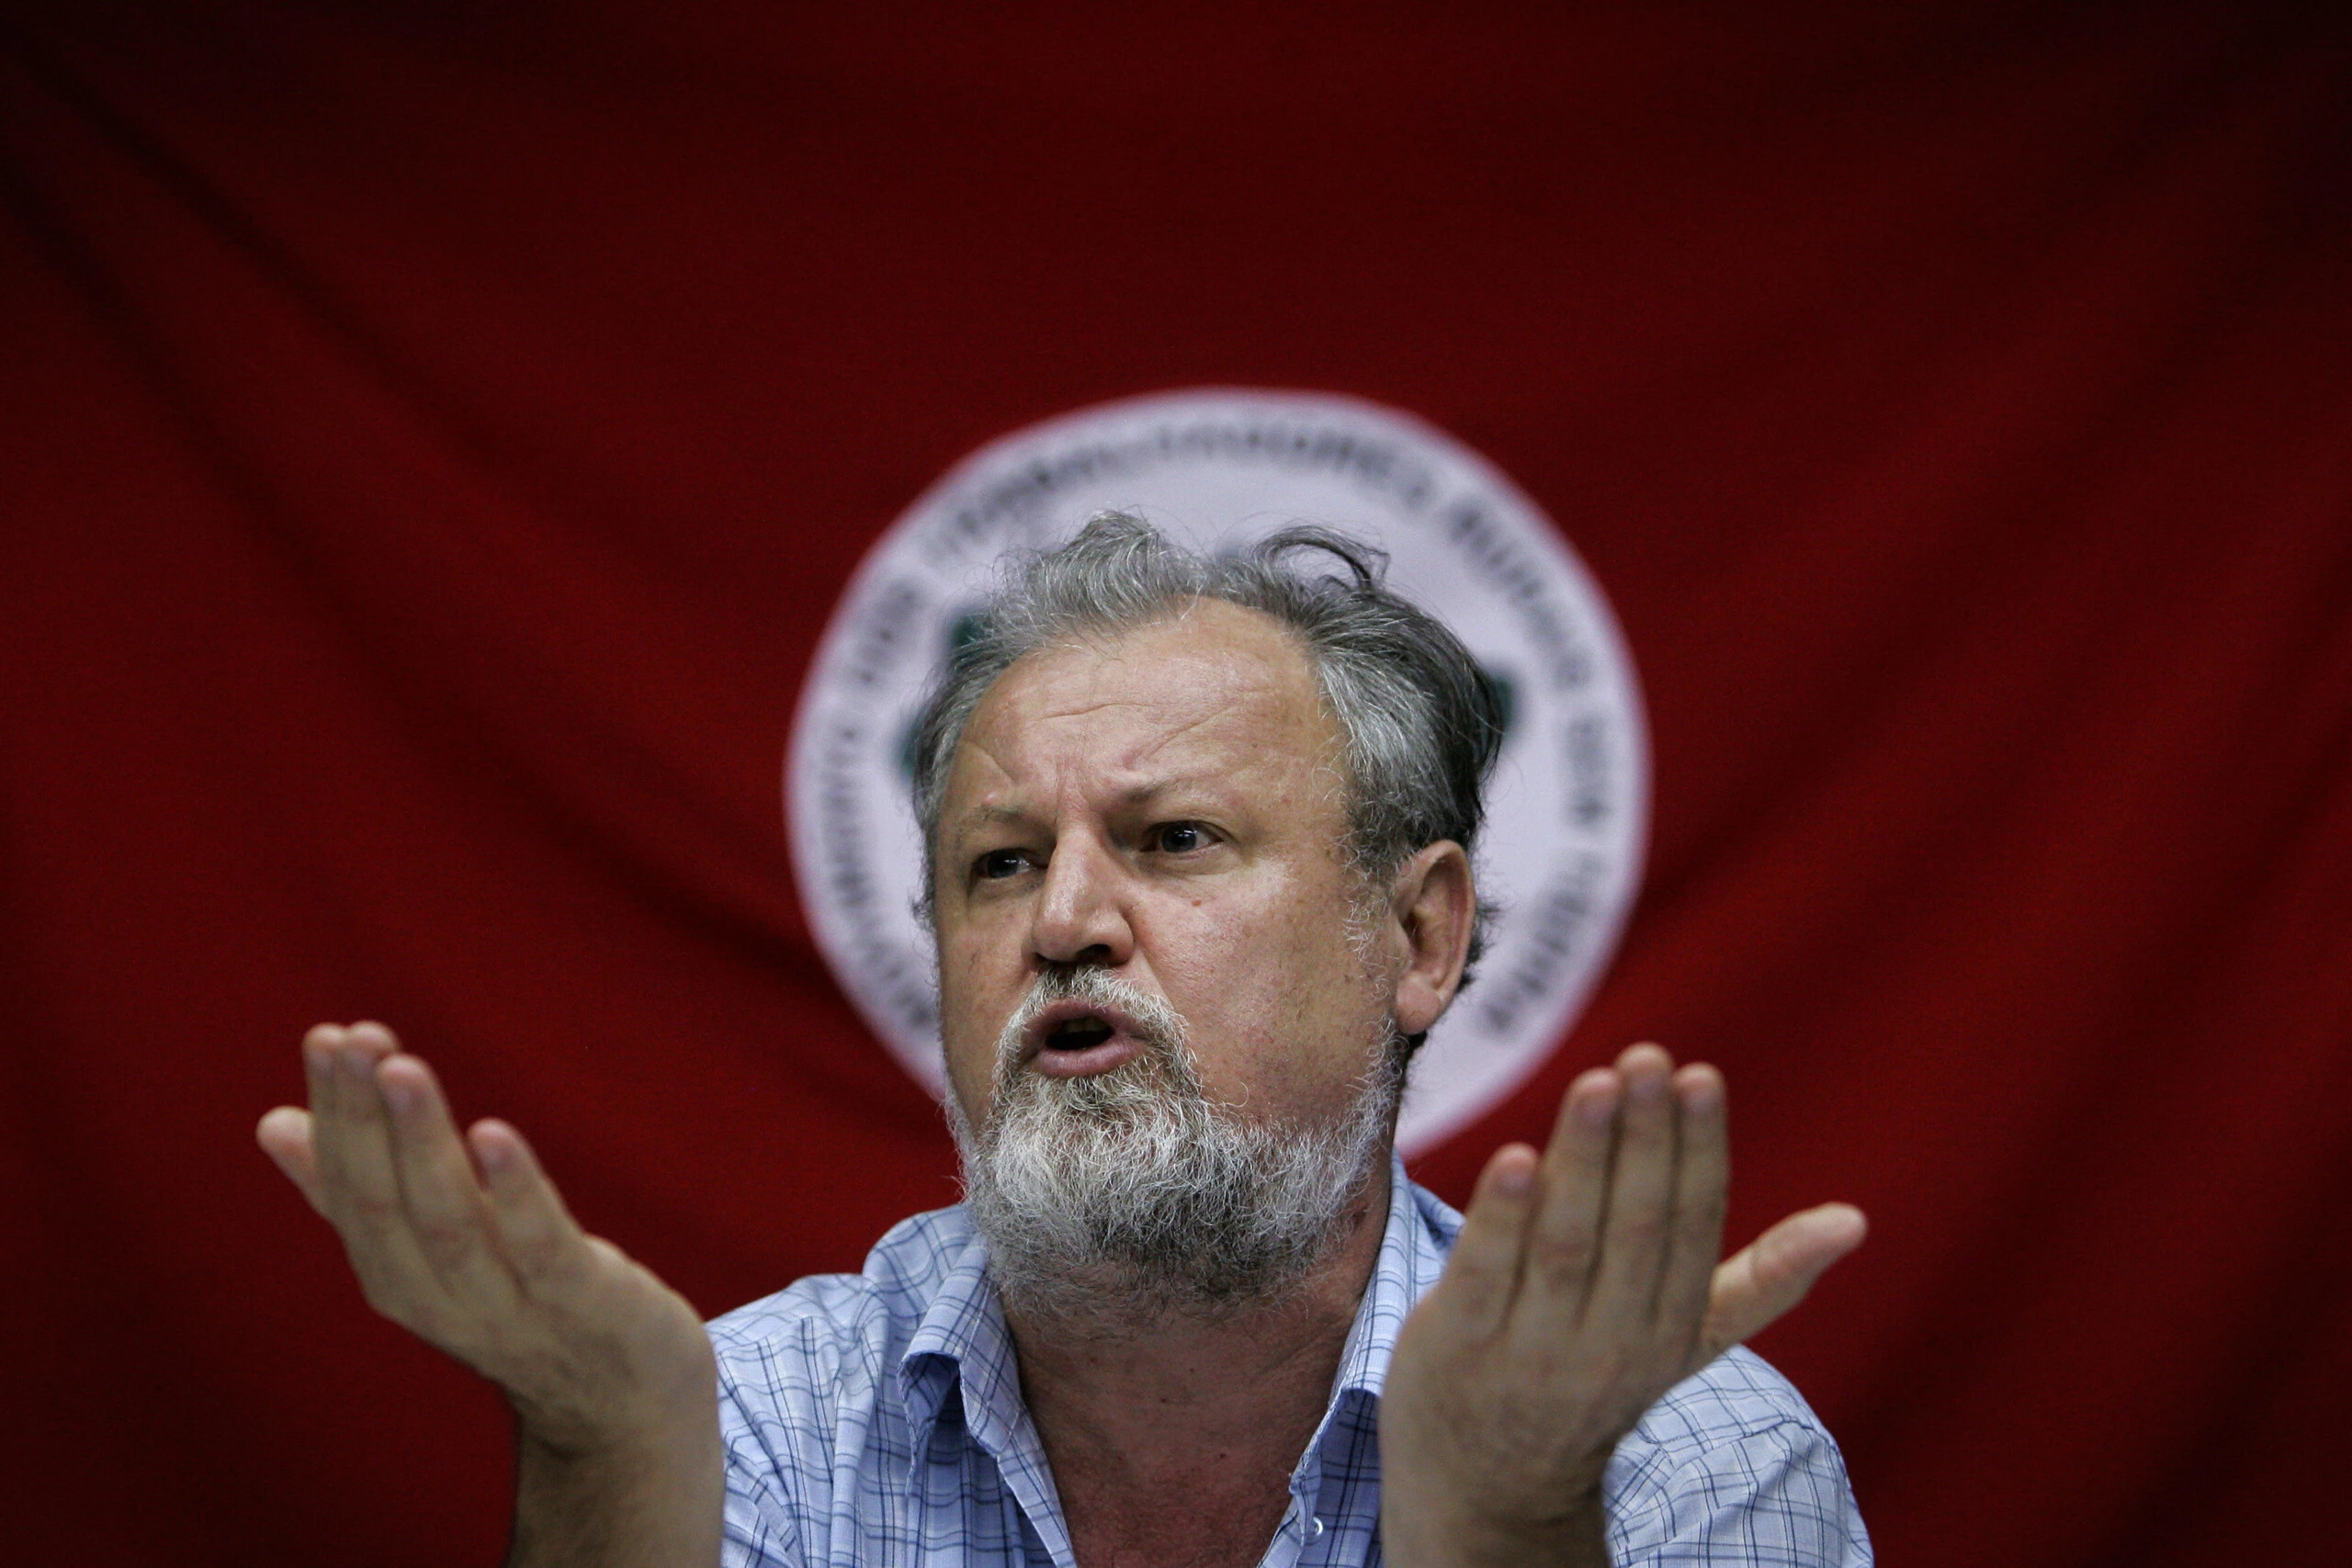 Brazil's Landless Workers Movement (MST) leader Joao Pedro Stedile answers questions during a press conference with foreign journalists, in Sao Paulo, Brazil, on April 14, 2009.  AFP PHOTO/Mauricio LIMA (Photo credit should read MAURICIO LIMA/AFP/Getty Images)